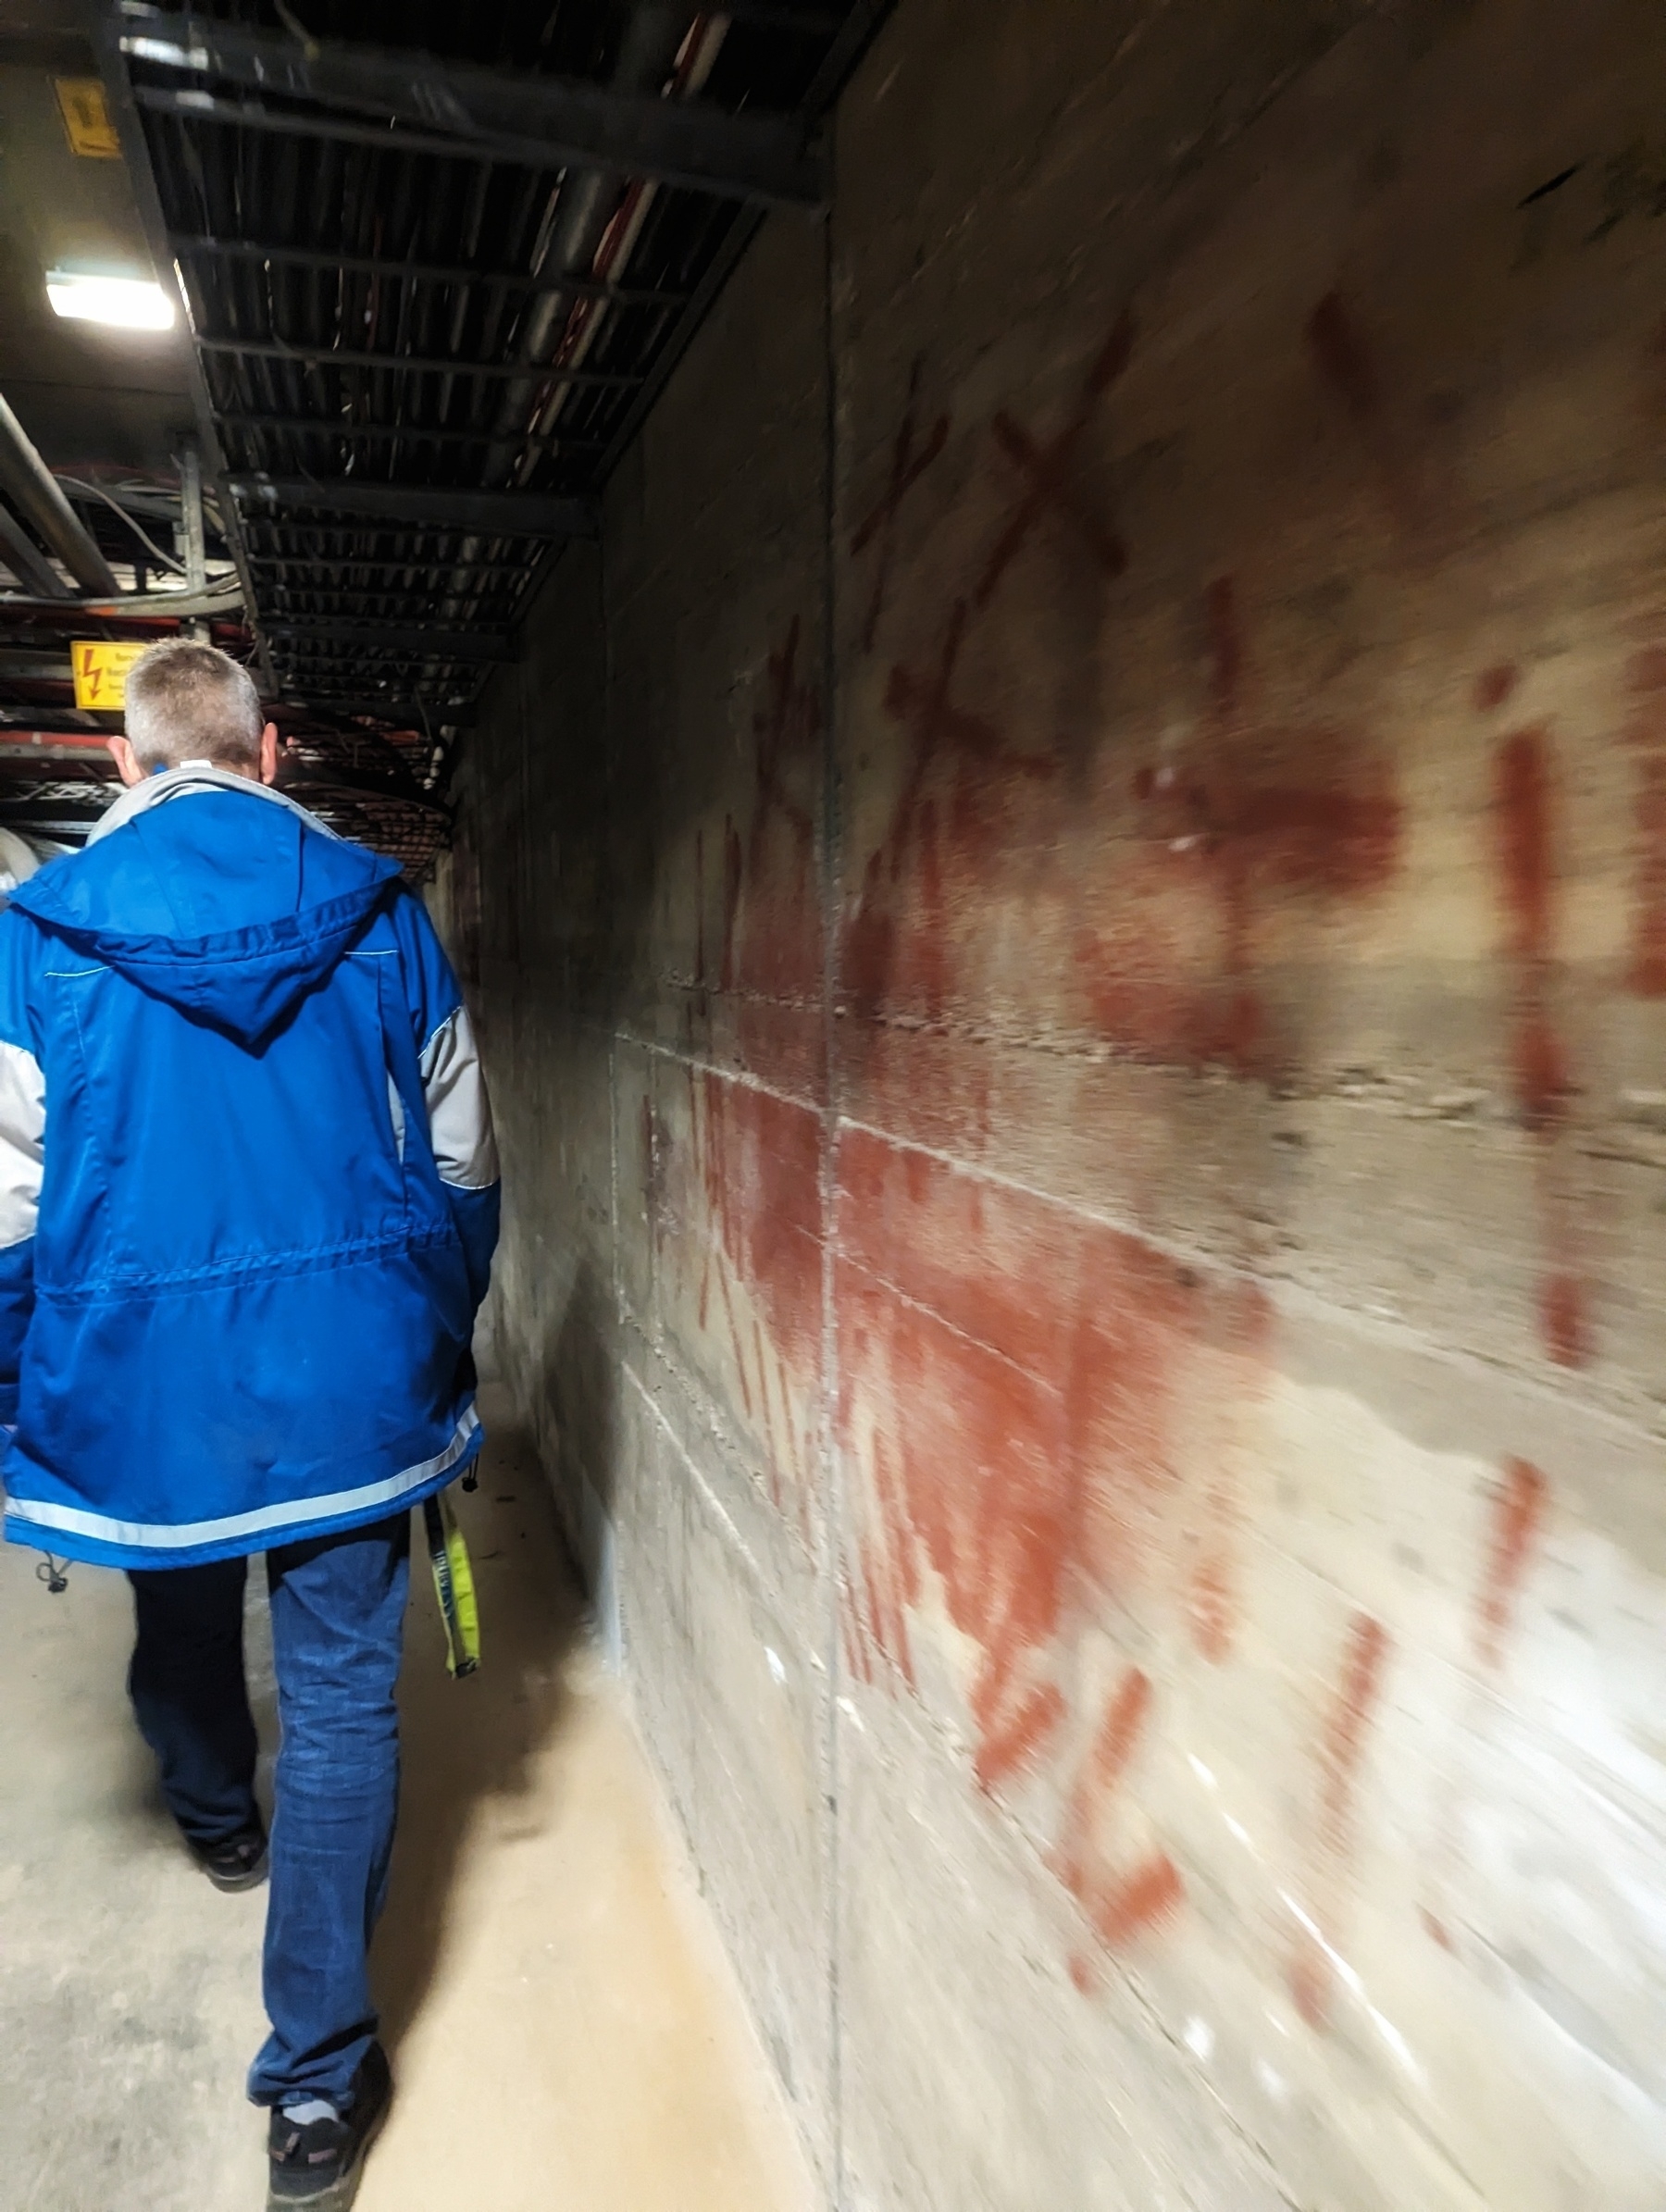 A man walks along a narrow concrete path. He wears blue maintenance staff clothing. He walks quickly. You see the concrete wall on the right with red paint fainting. Eerie